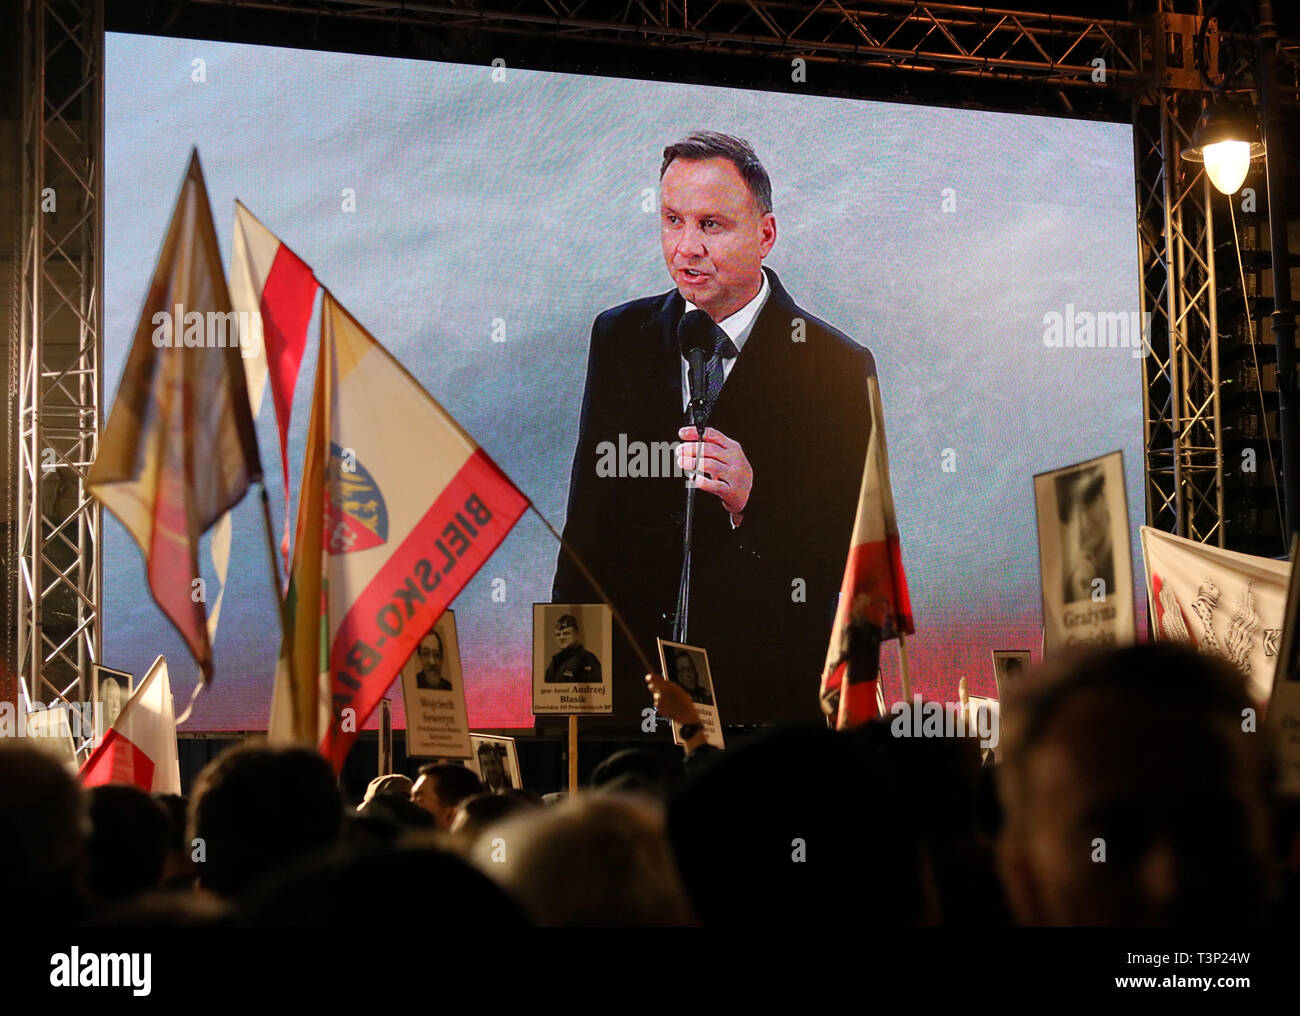 President Andrzej Duda participates in the 9th anniversary of Smolensk air disaster held on April 10, 2019 in Warsaw, Poland. Stock Photo